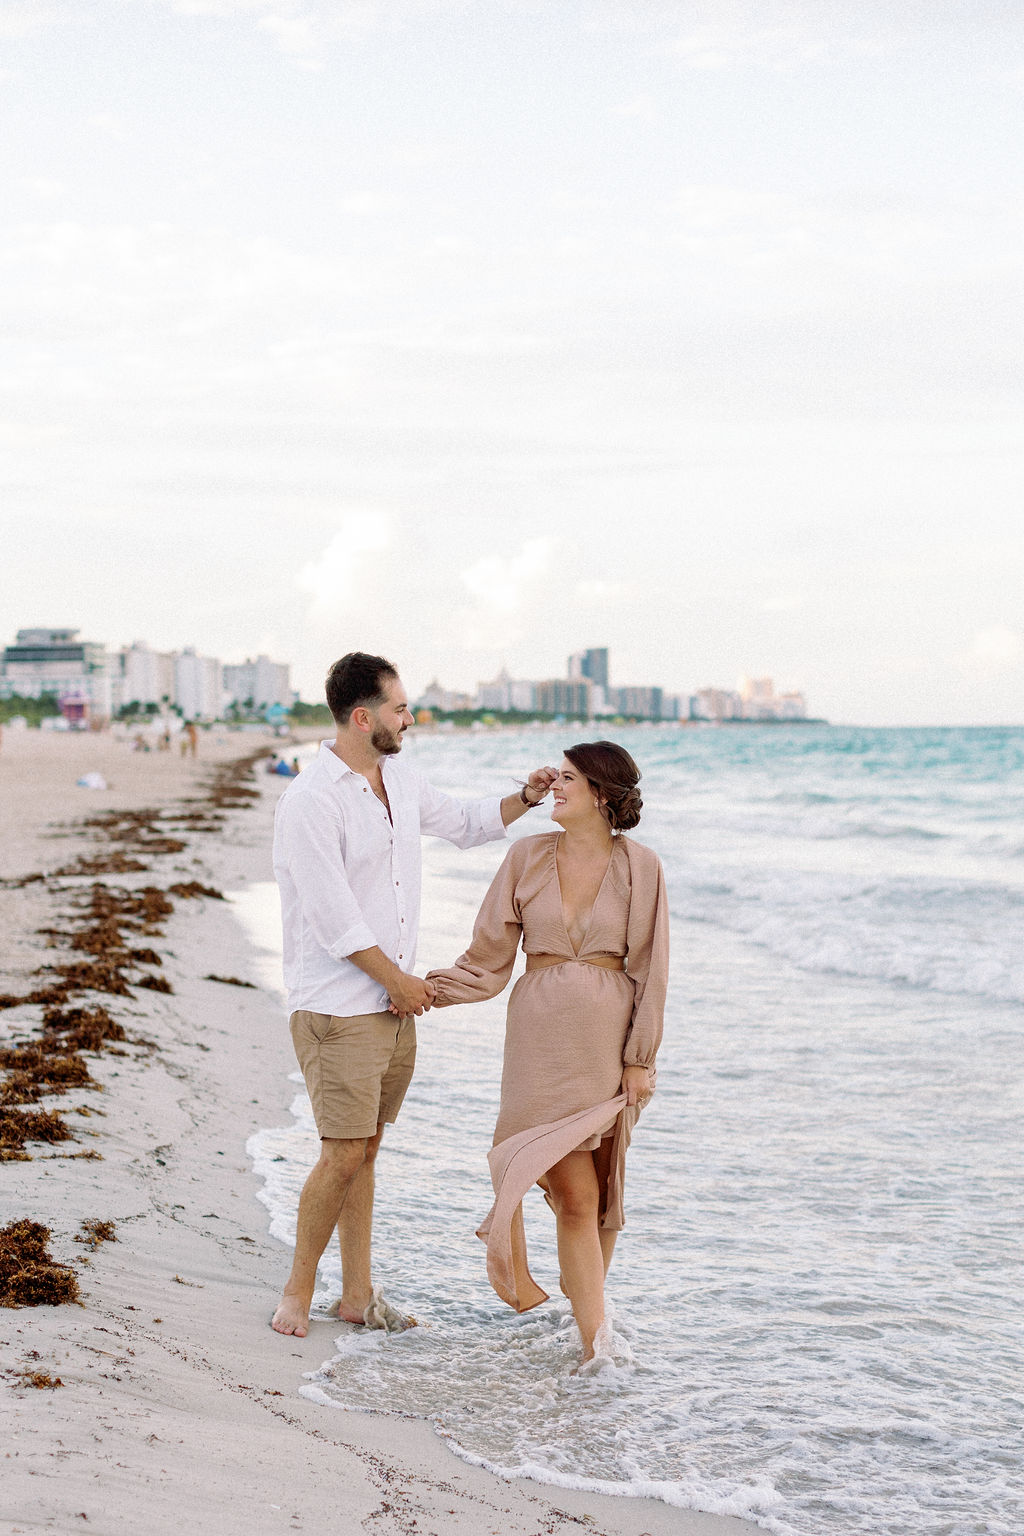 South Pointe Park Engagement Photos, South Pointe Park Engagement, Miami Engagement Photographer, Erika Tuesta Photography